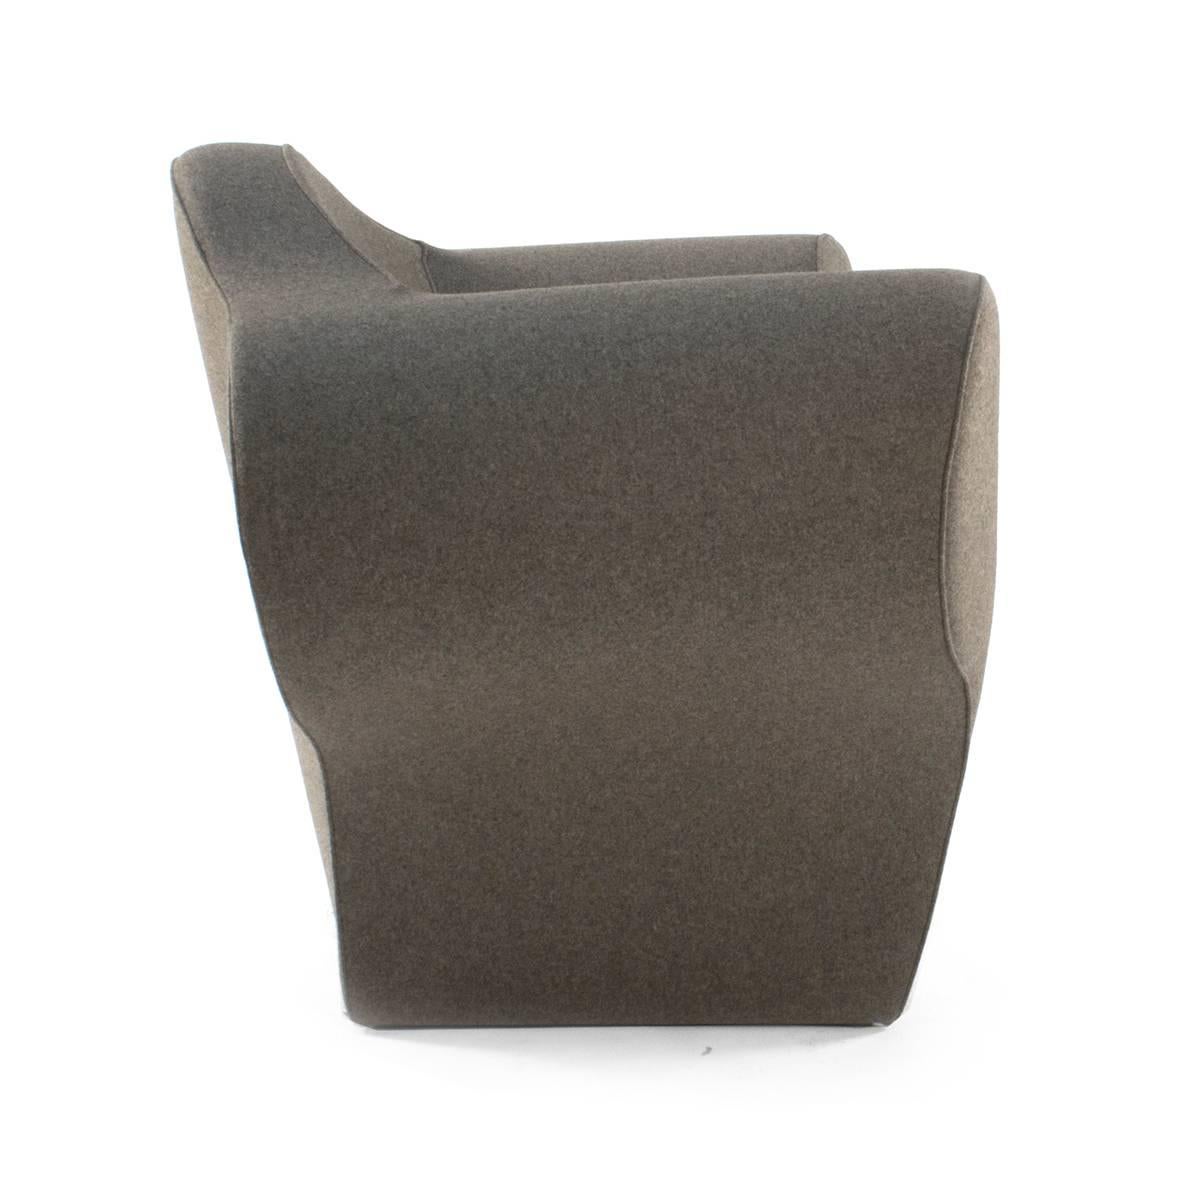 Moroso Soft Big Easy Lounge Armchair by Ron Arad, Italy In Good Condition For Sale In Brooklyn, NY